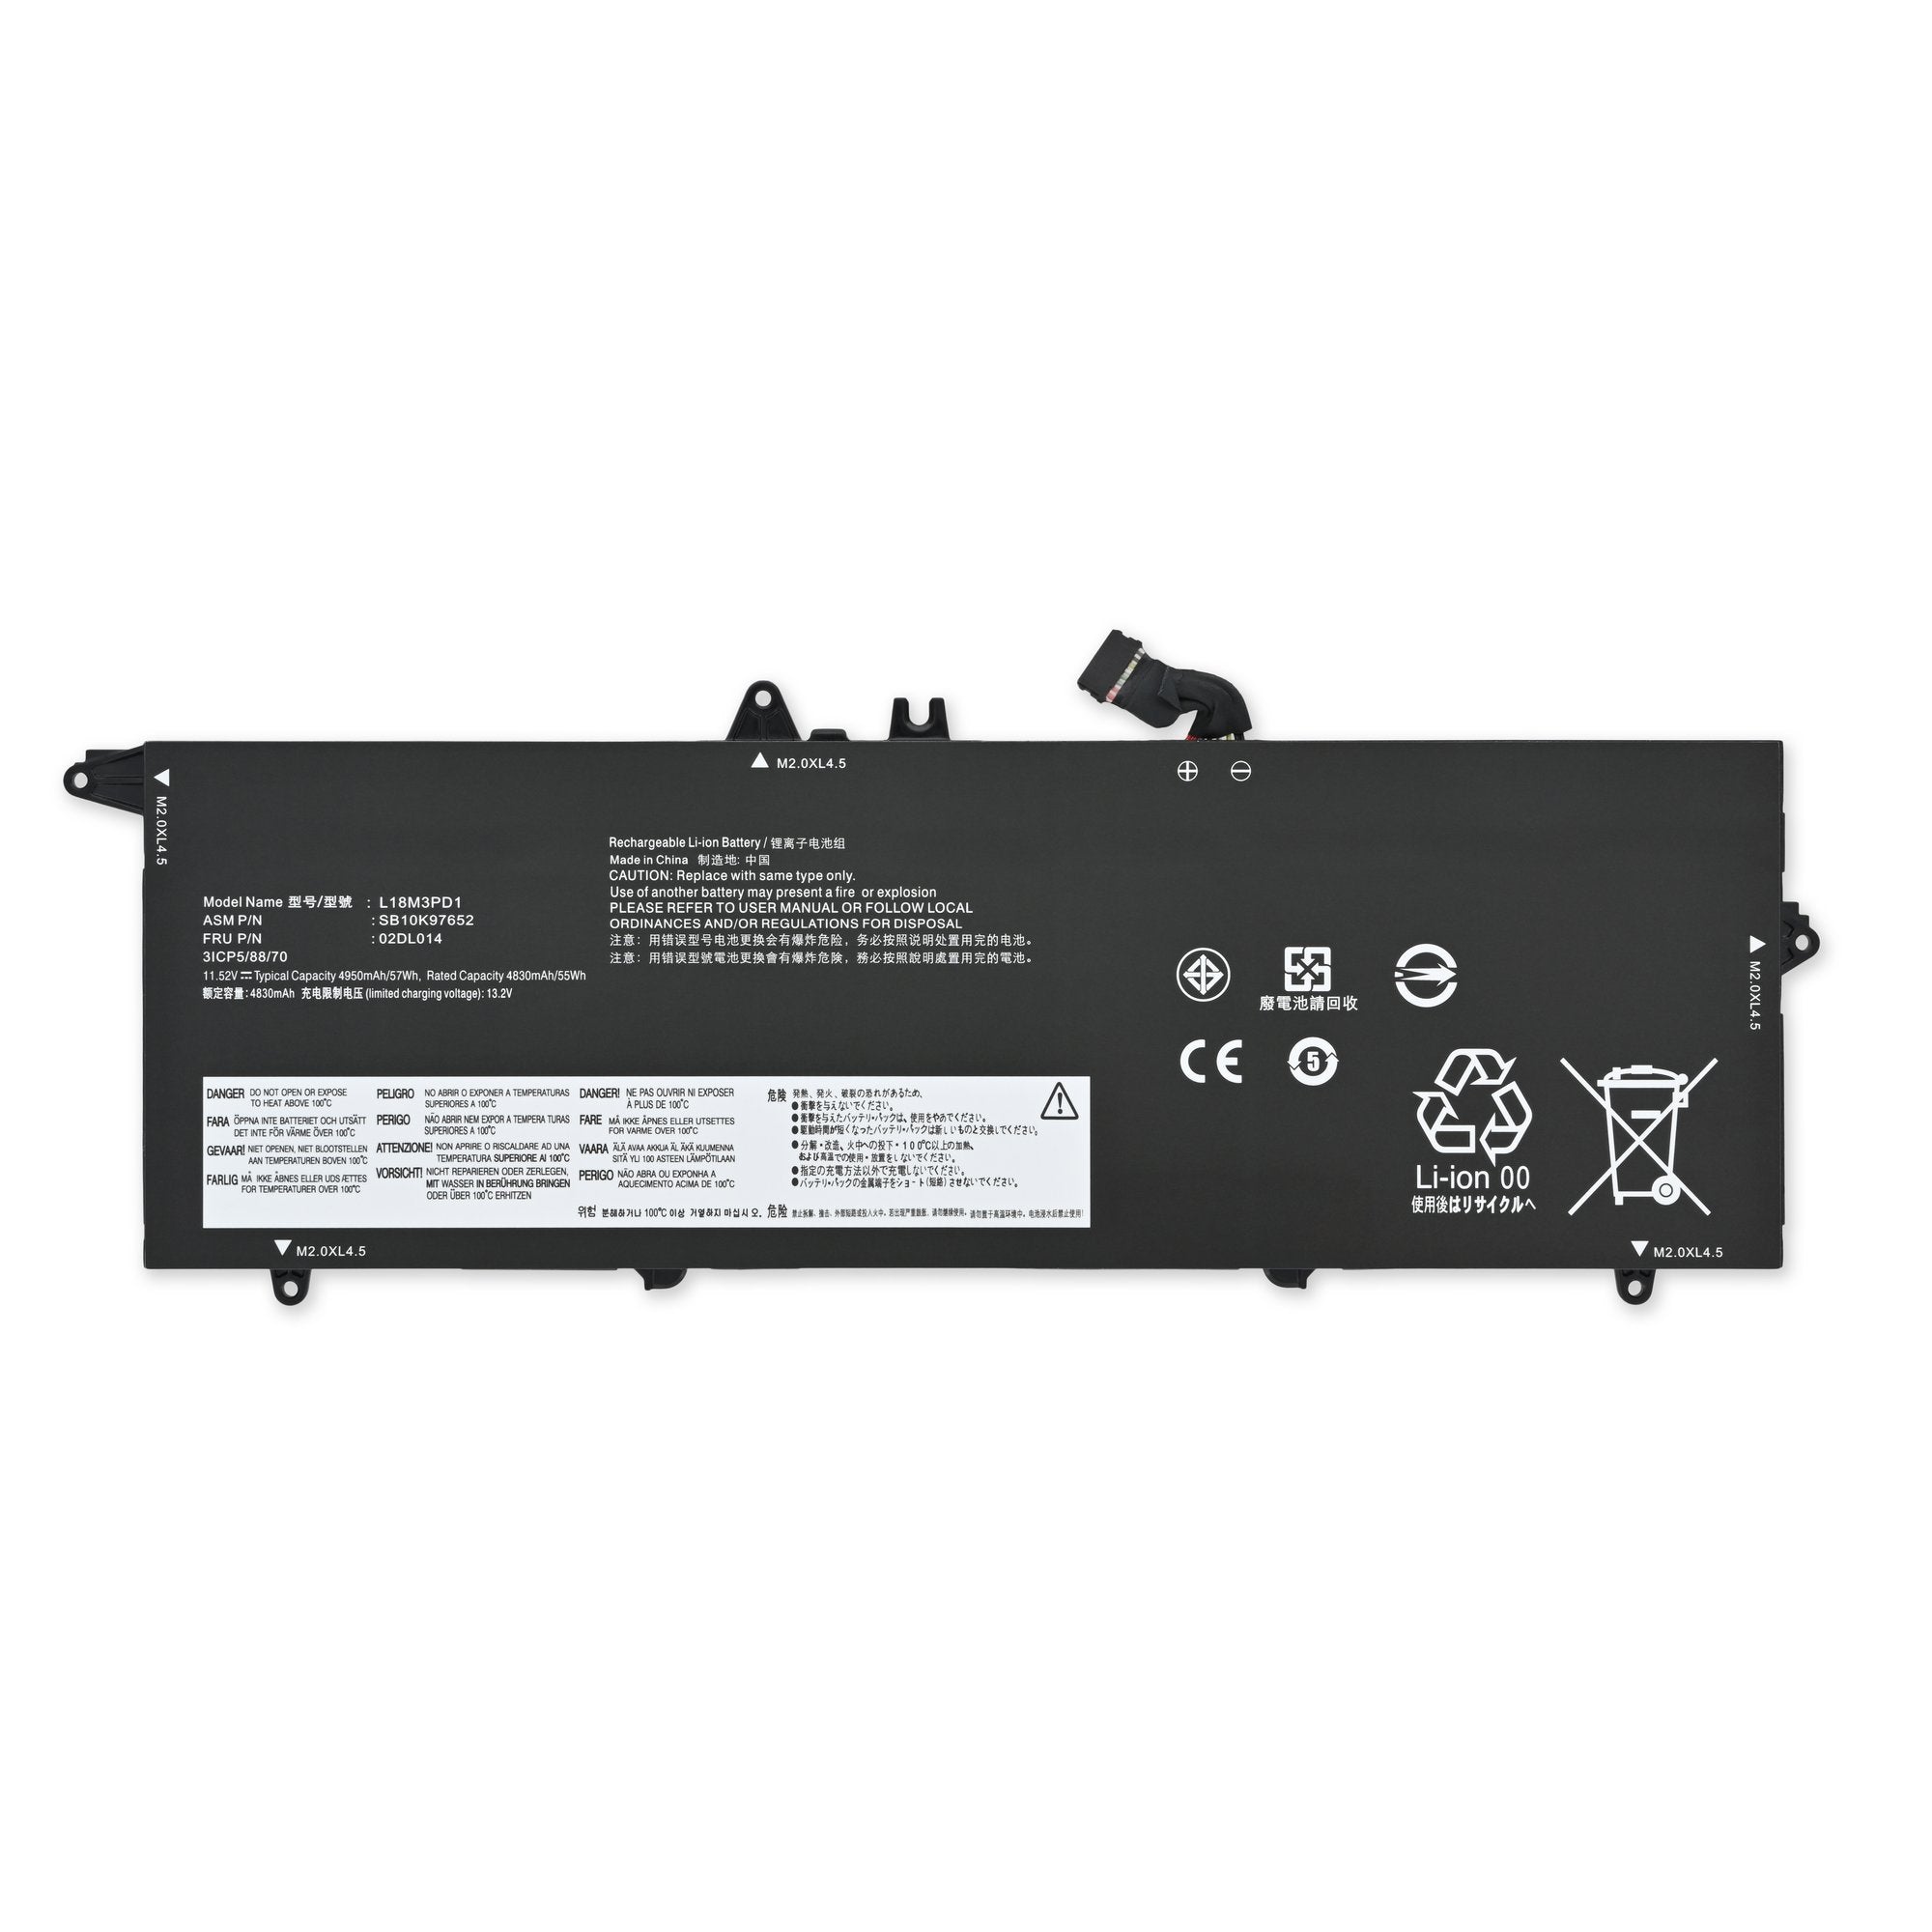 Lenovo ThinkPad T14s / T490s / T495s Battery New Part Only